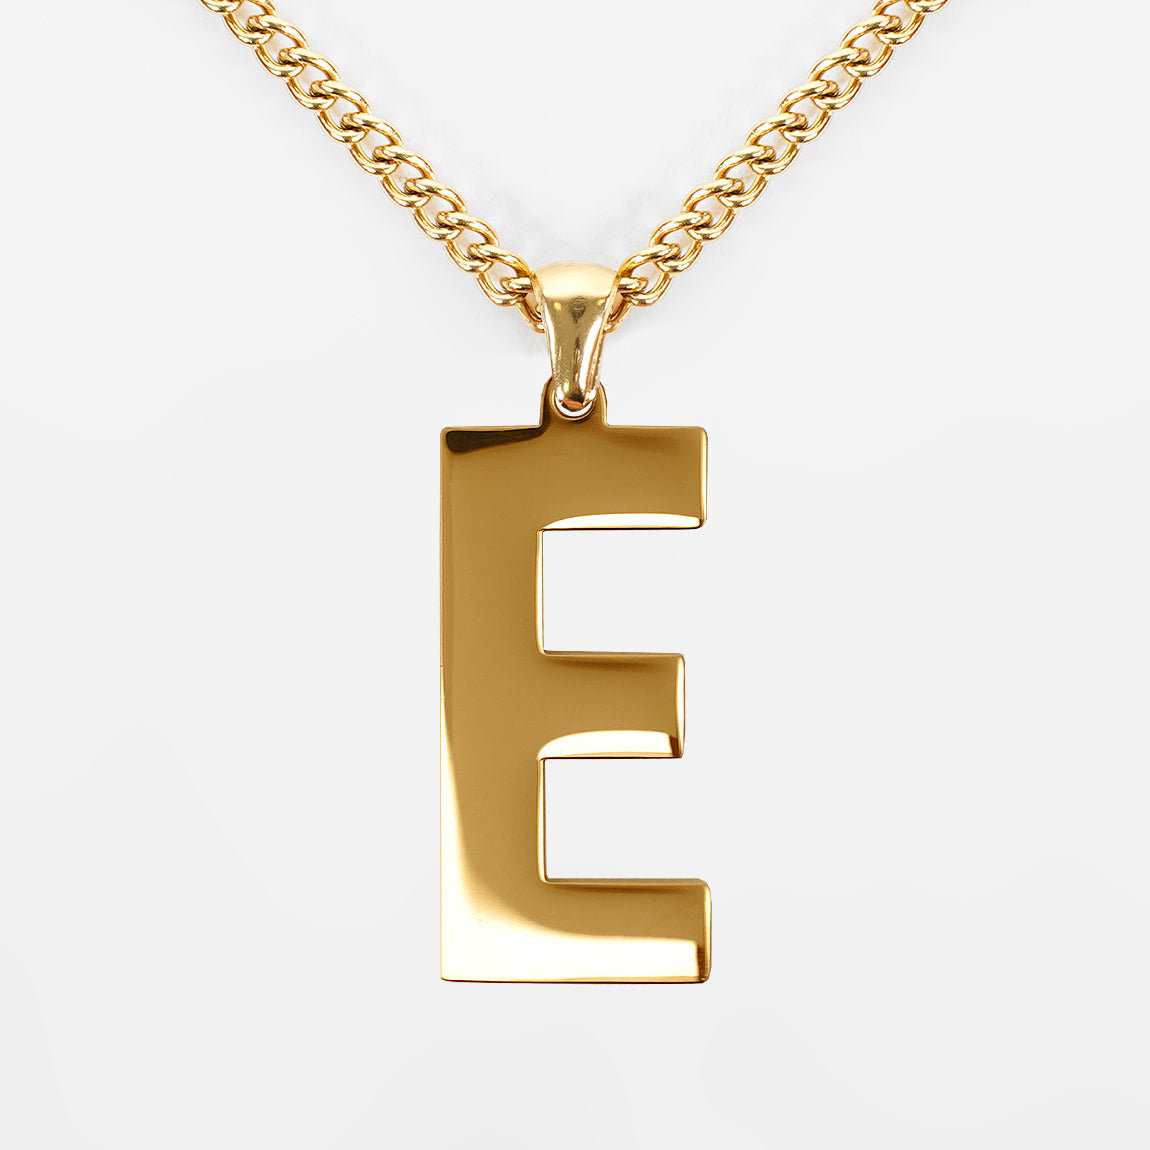 E Letter Pendant with Chain Necklace - Gold Plated Stainless Steel